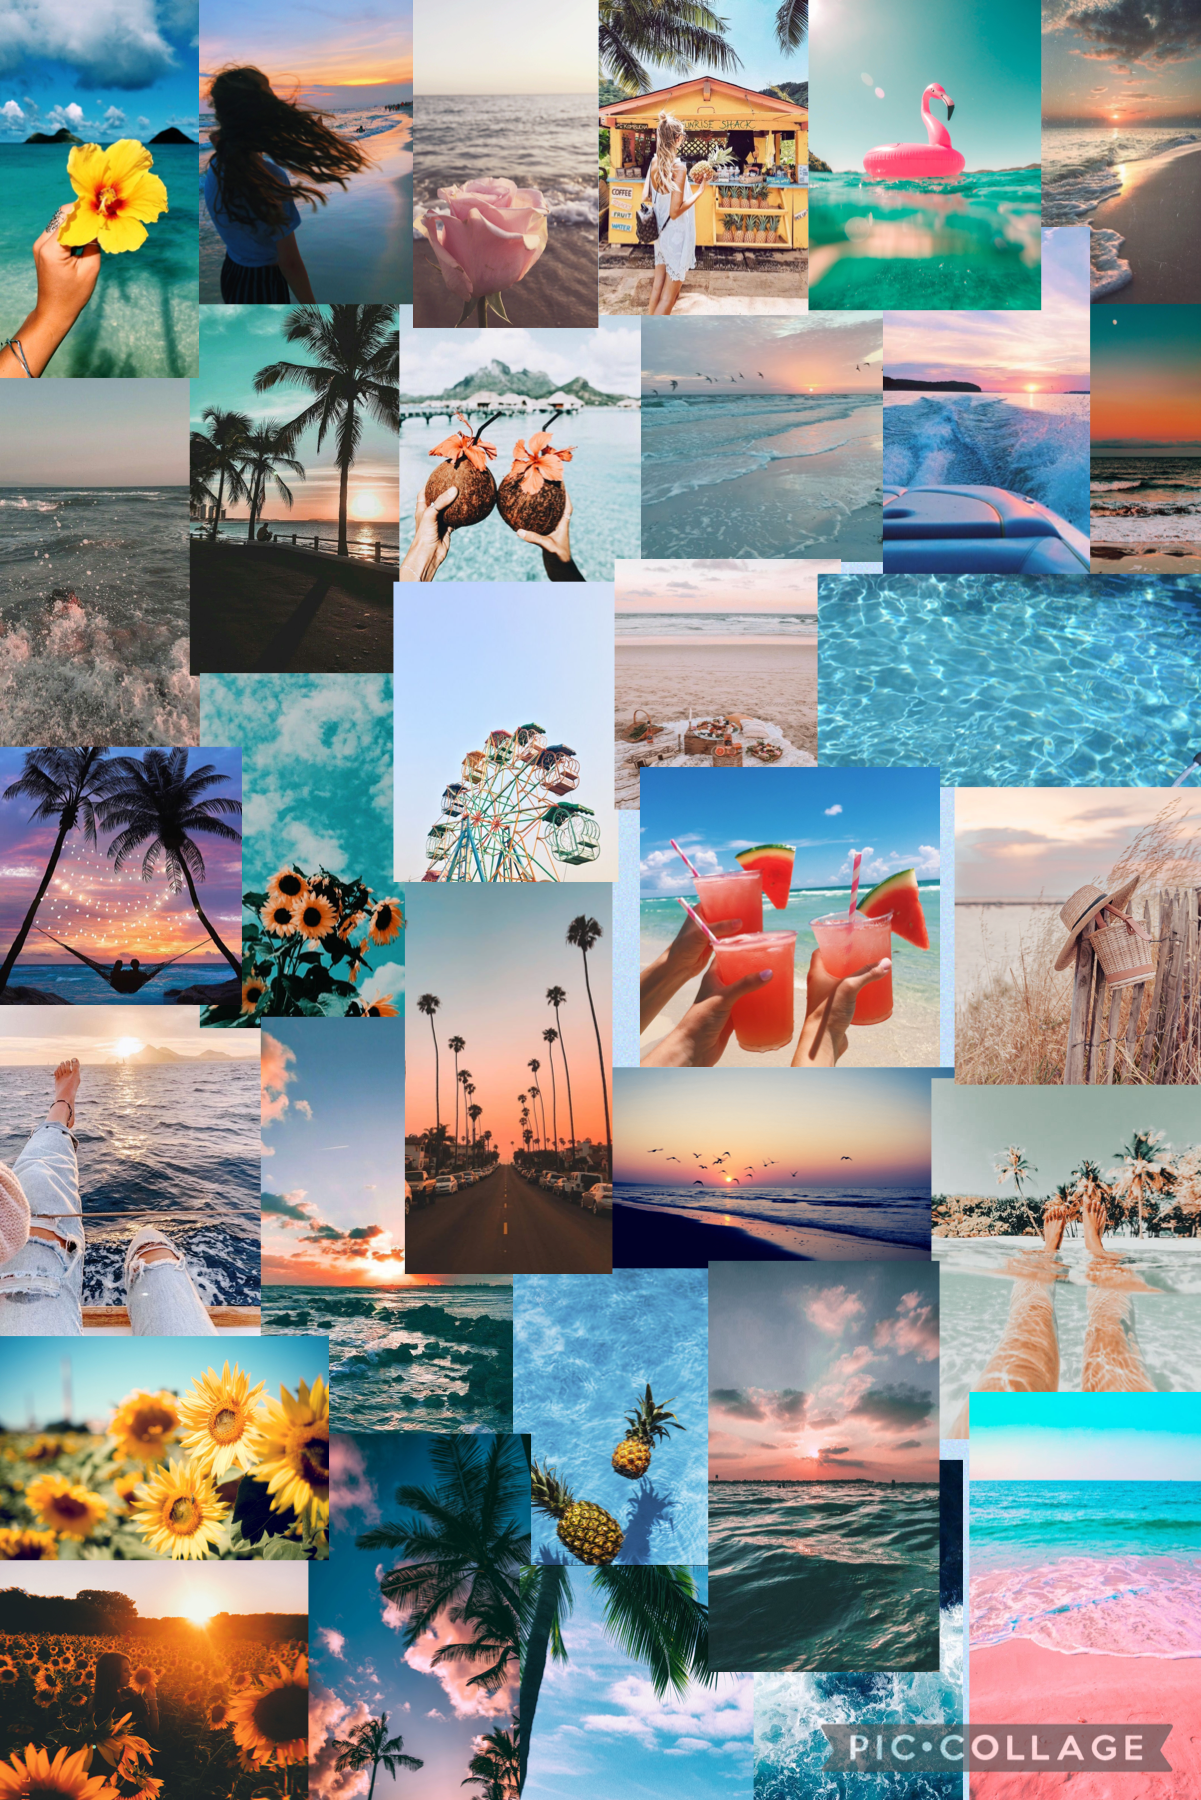 🌞tap🌞
summer collage! who else is ready for summer?